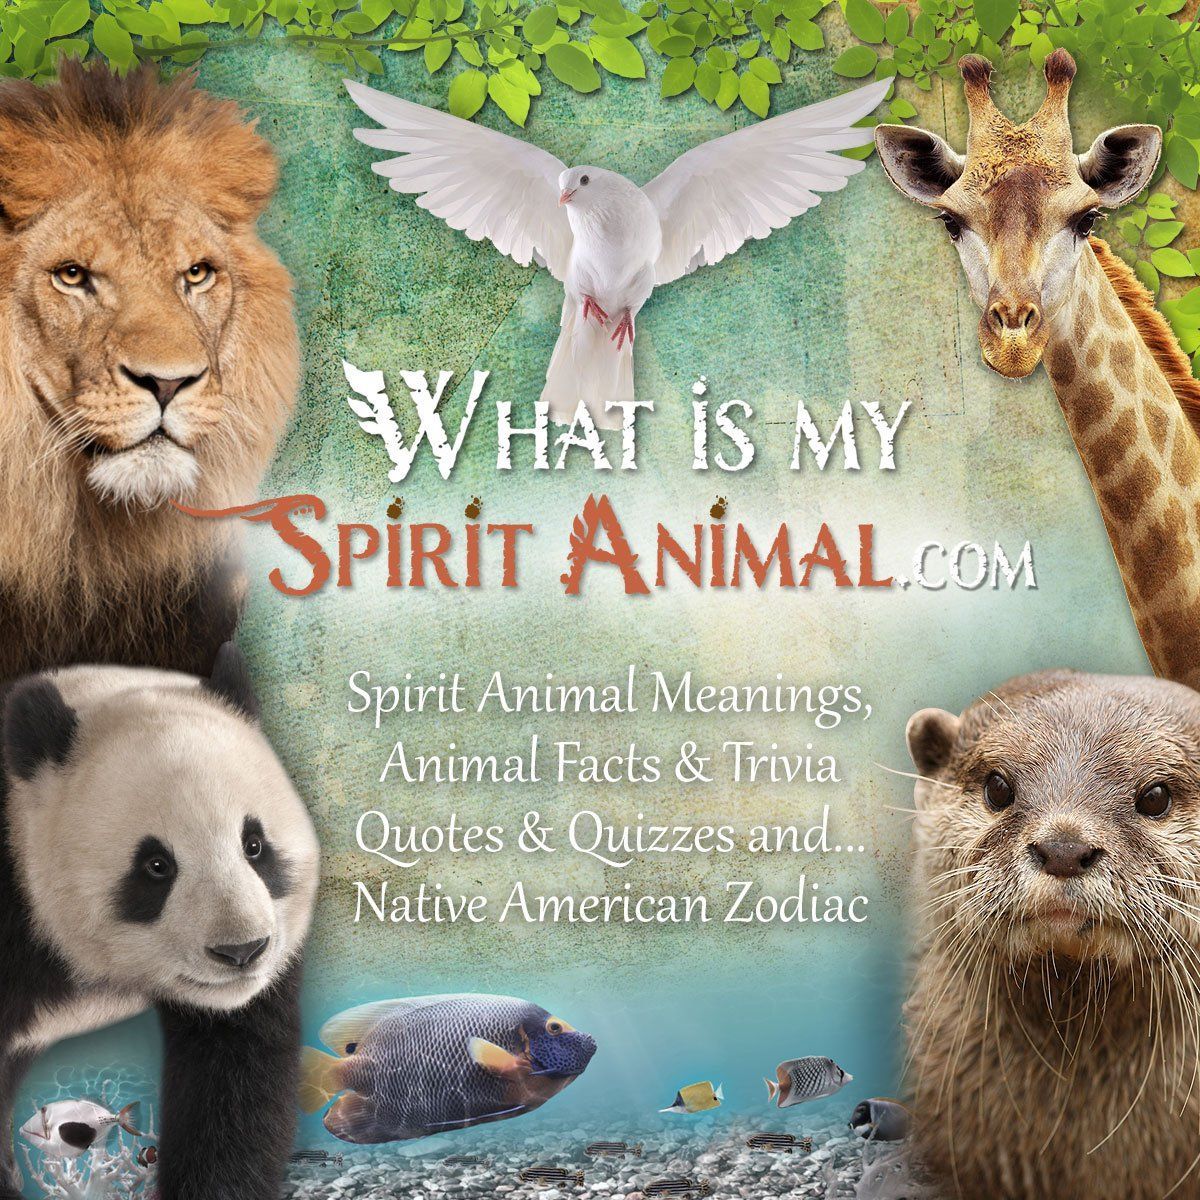 Psychic Abilities & Spirit Animals: What You Need to Know